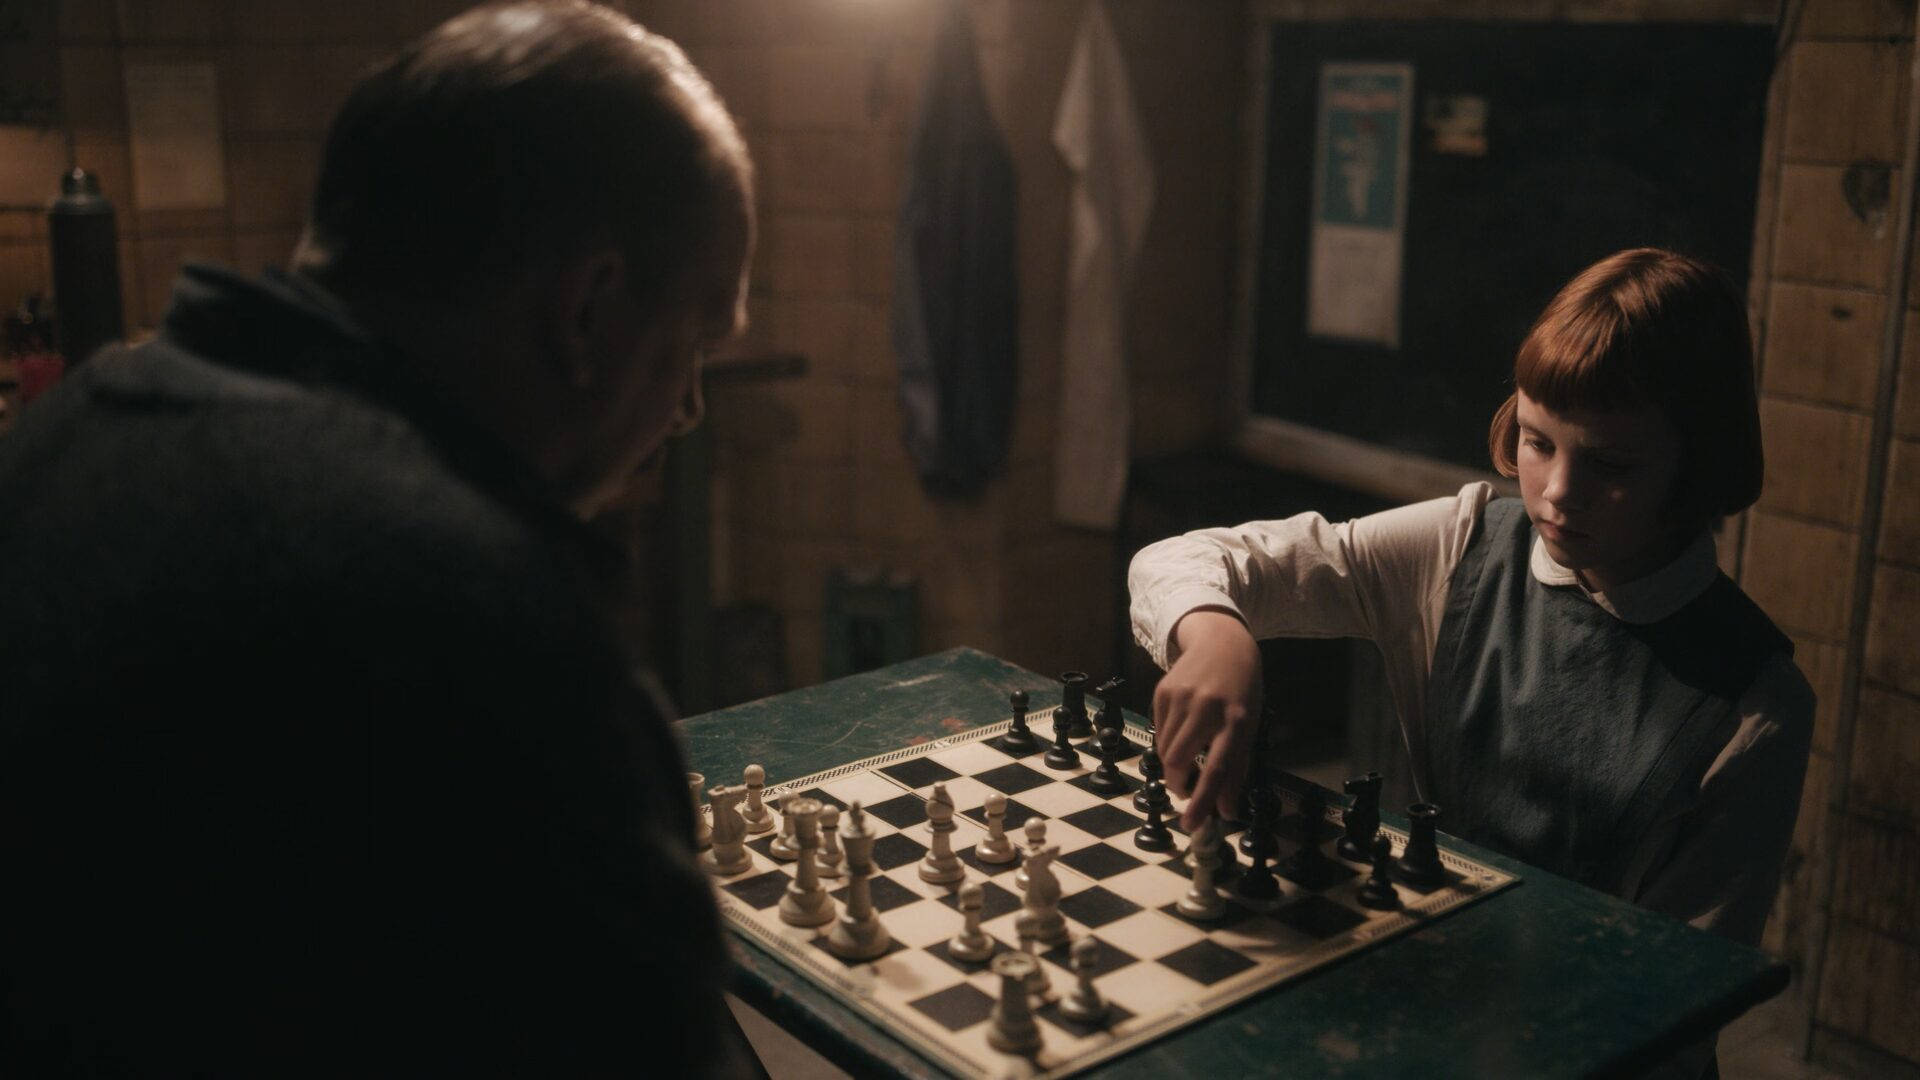 Mr. Shaibel teaches Beth, a young chess prodigy, in 'The Queen's Gambit'. Wallpaper